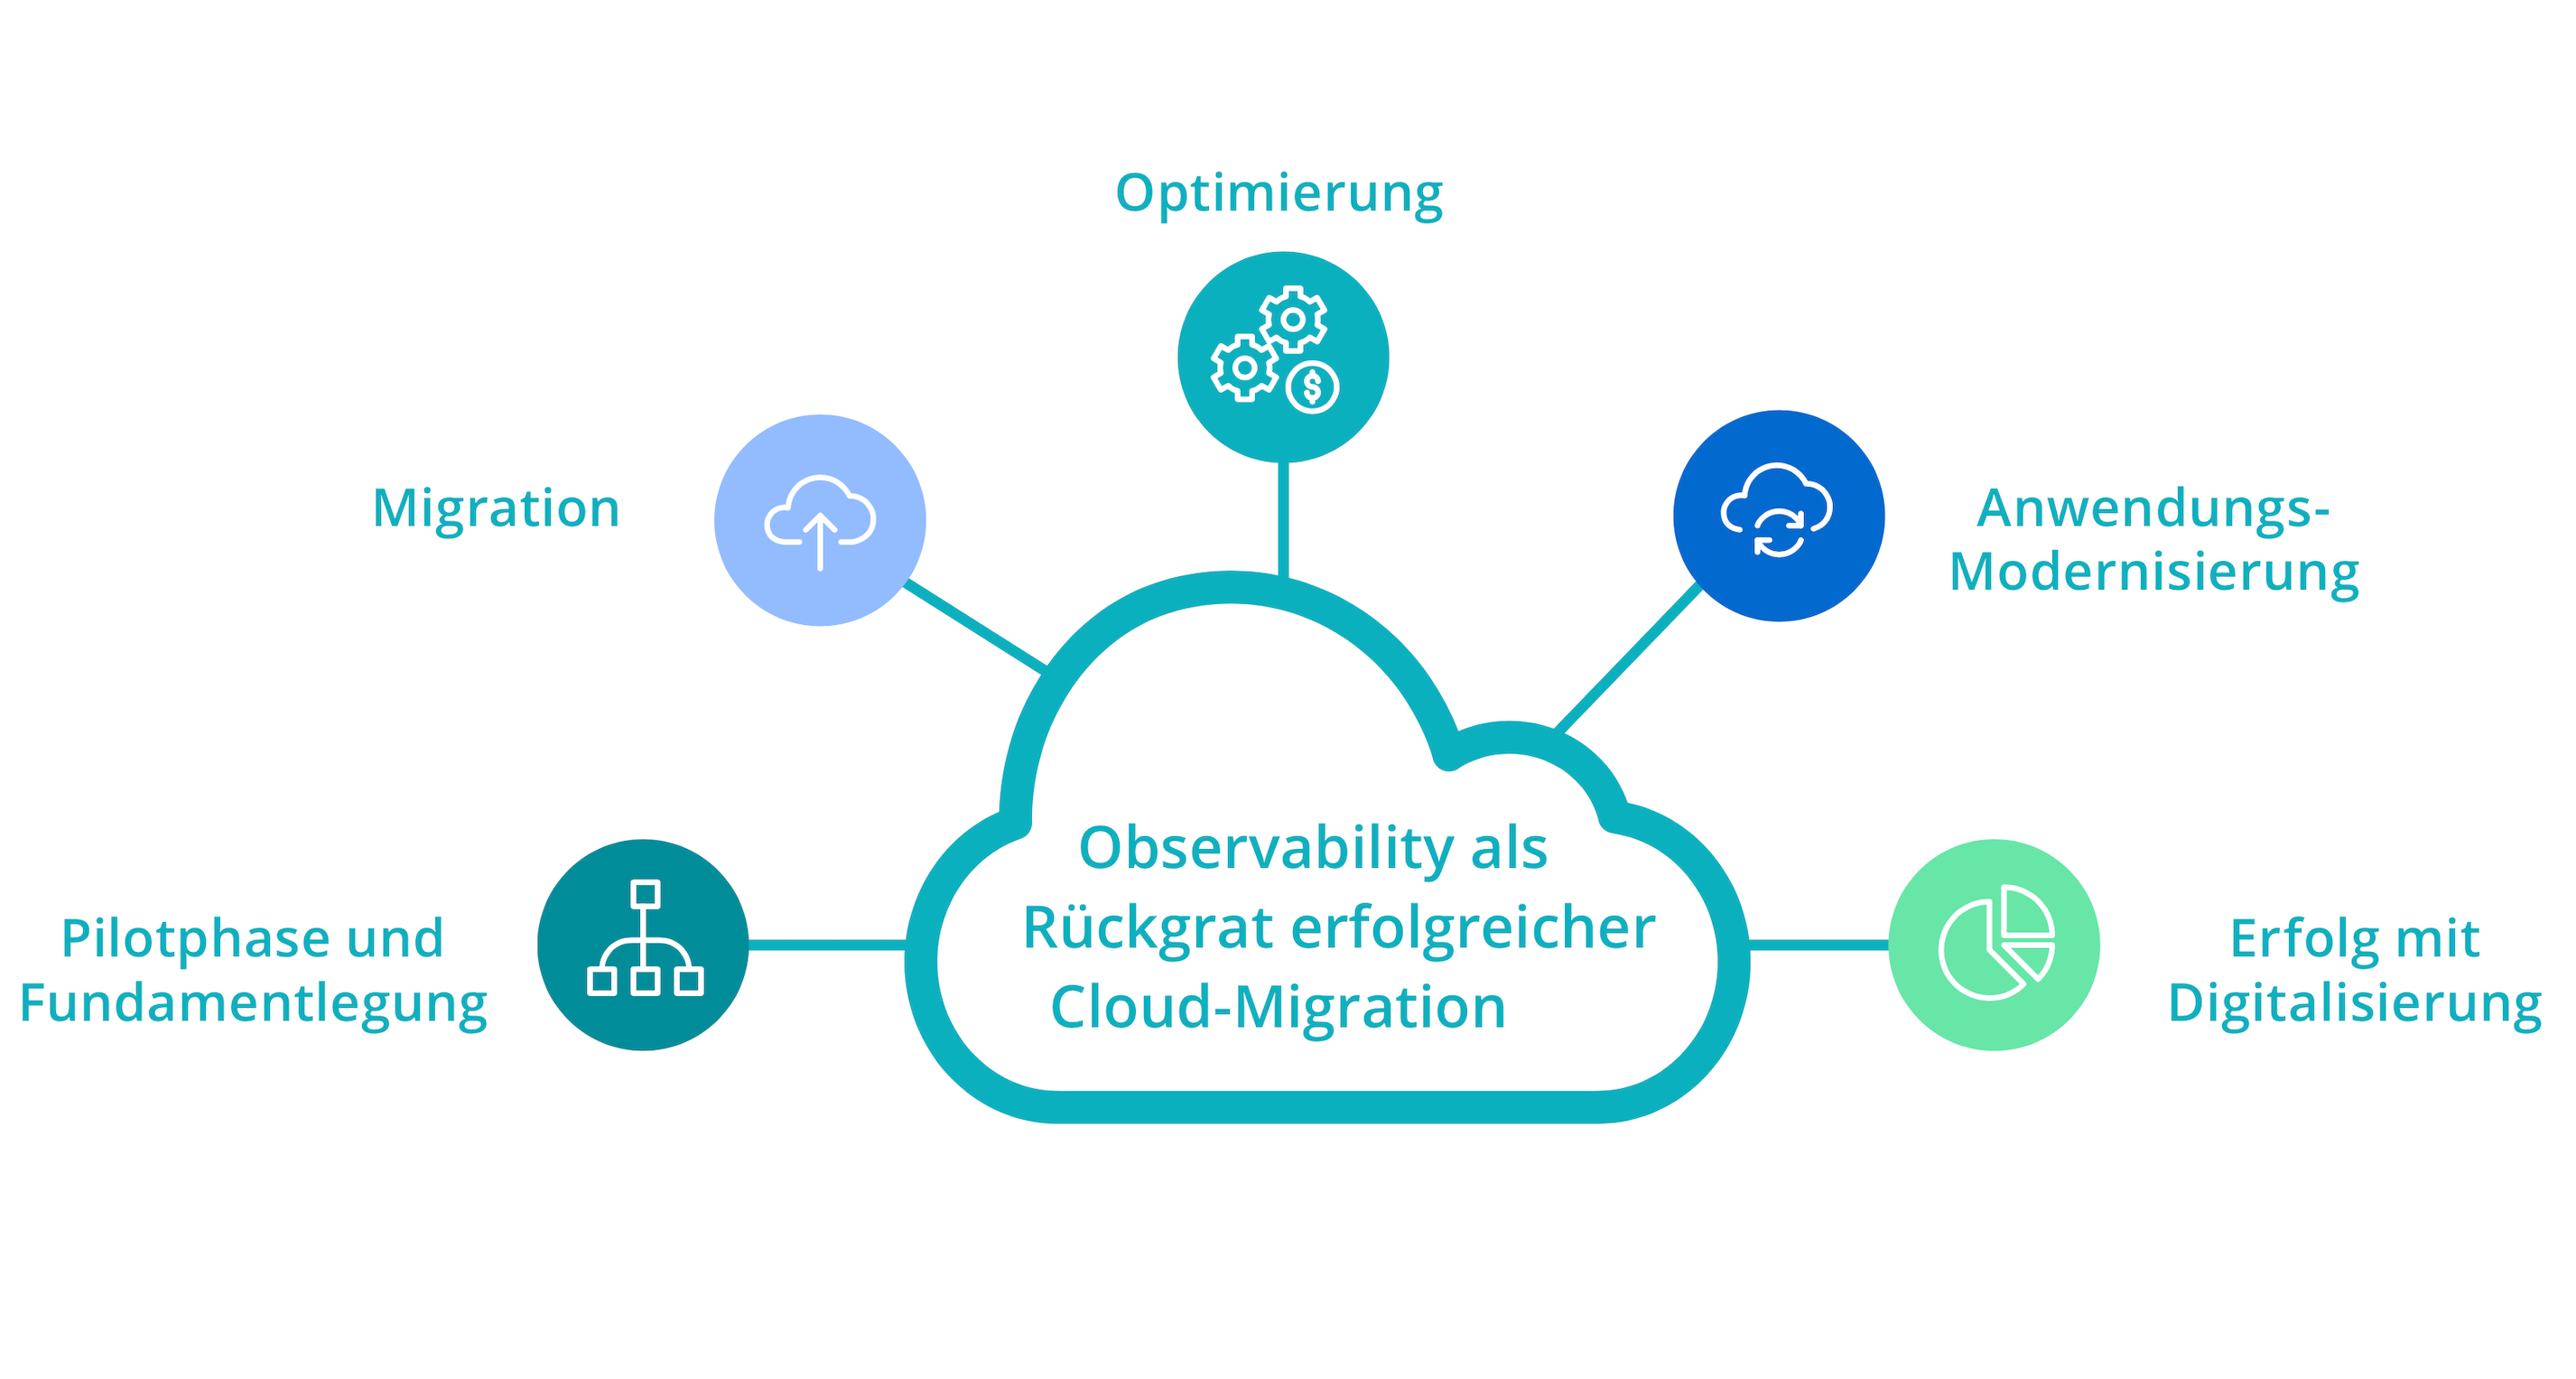 observability drives successful cloud adoption graphic